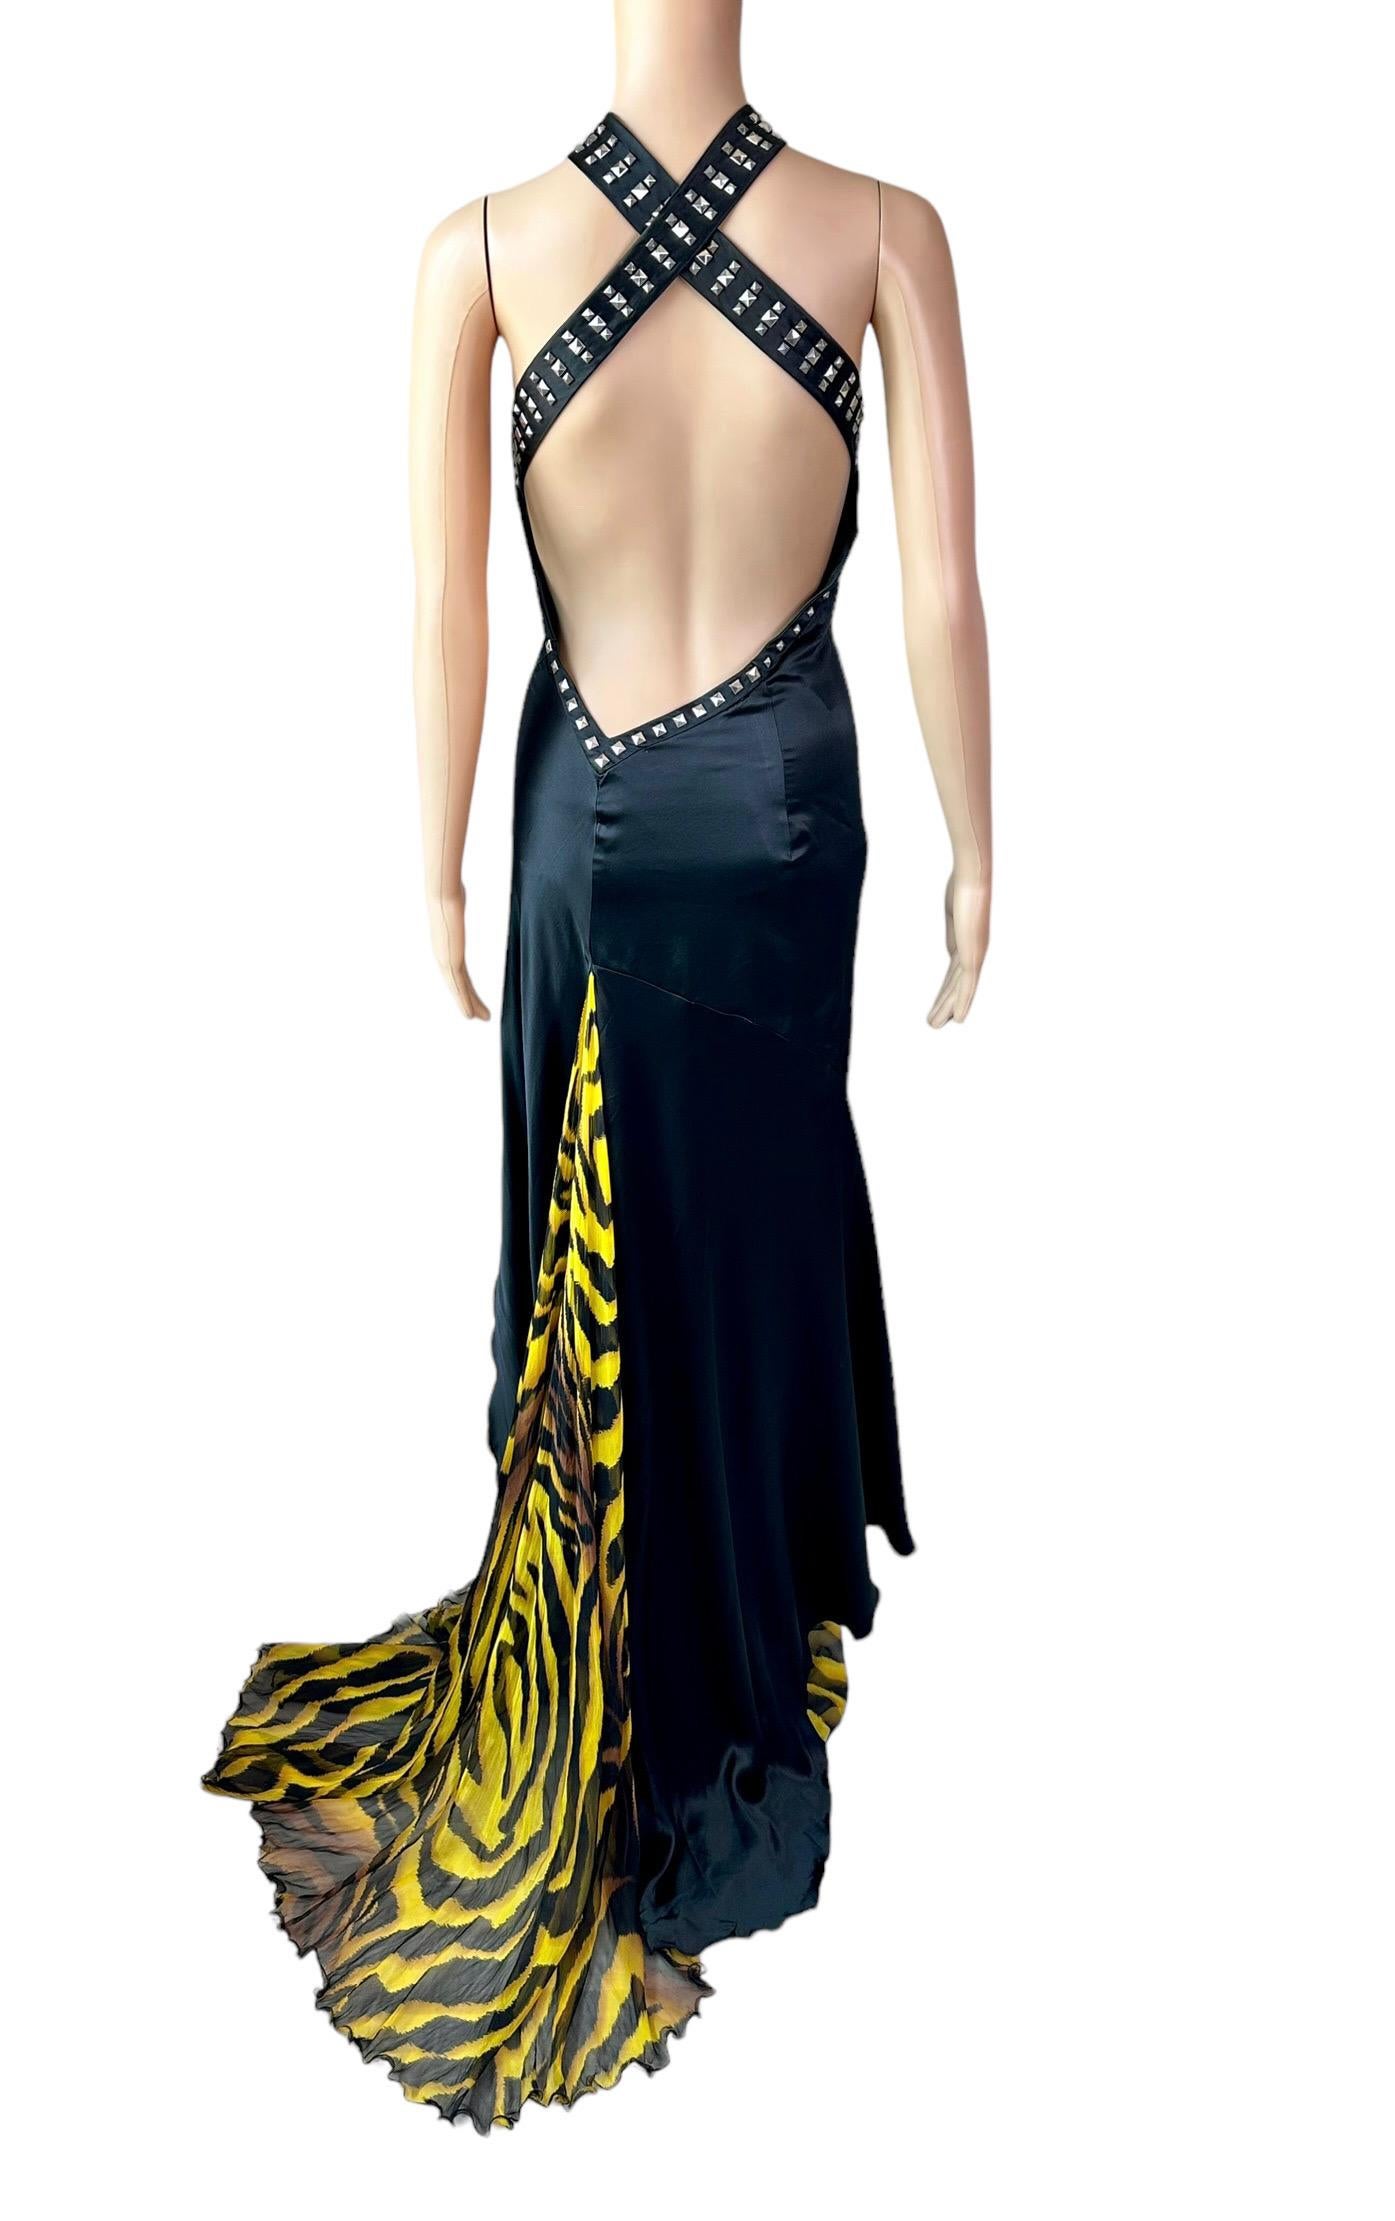 Versace F/W 2004 Runway Embellished Studded Bondage Halter Plunging Keyhole Neckline Open Back Evening Dress Gown IT 42

Look 51 from the Versace Fall Collection.

Versace silk black evening dress featuring silver square studs embellishments, halter